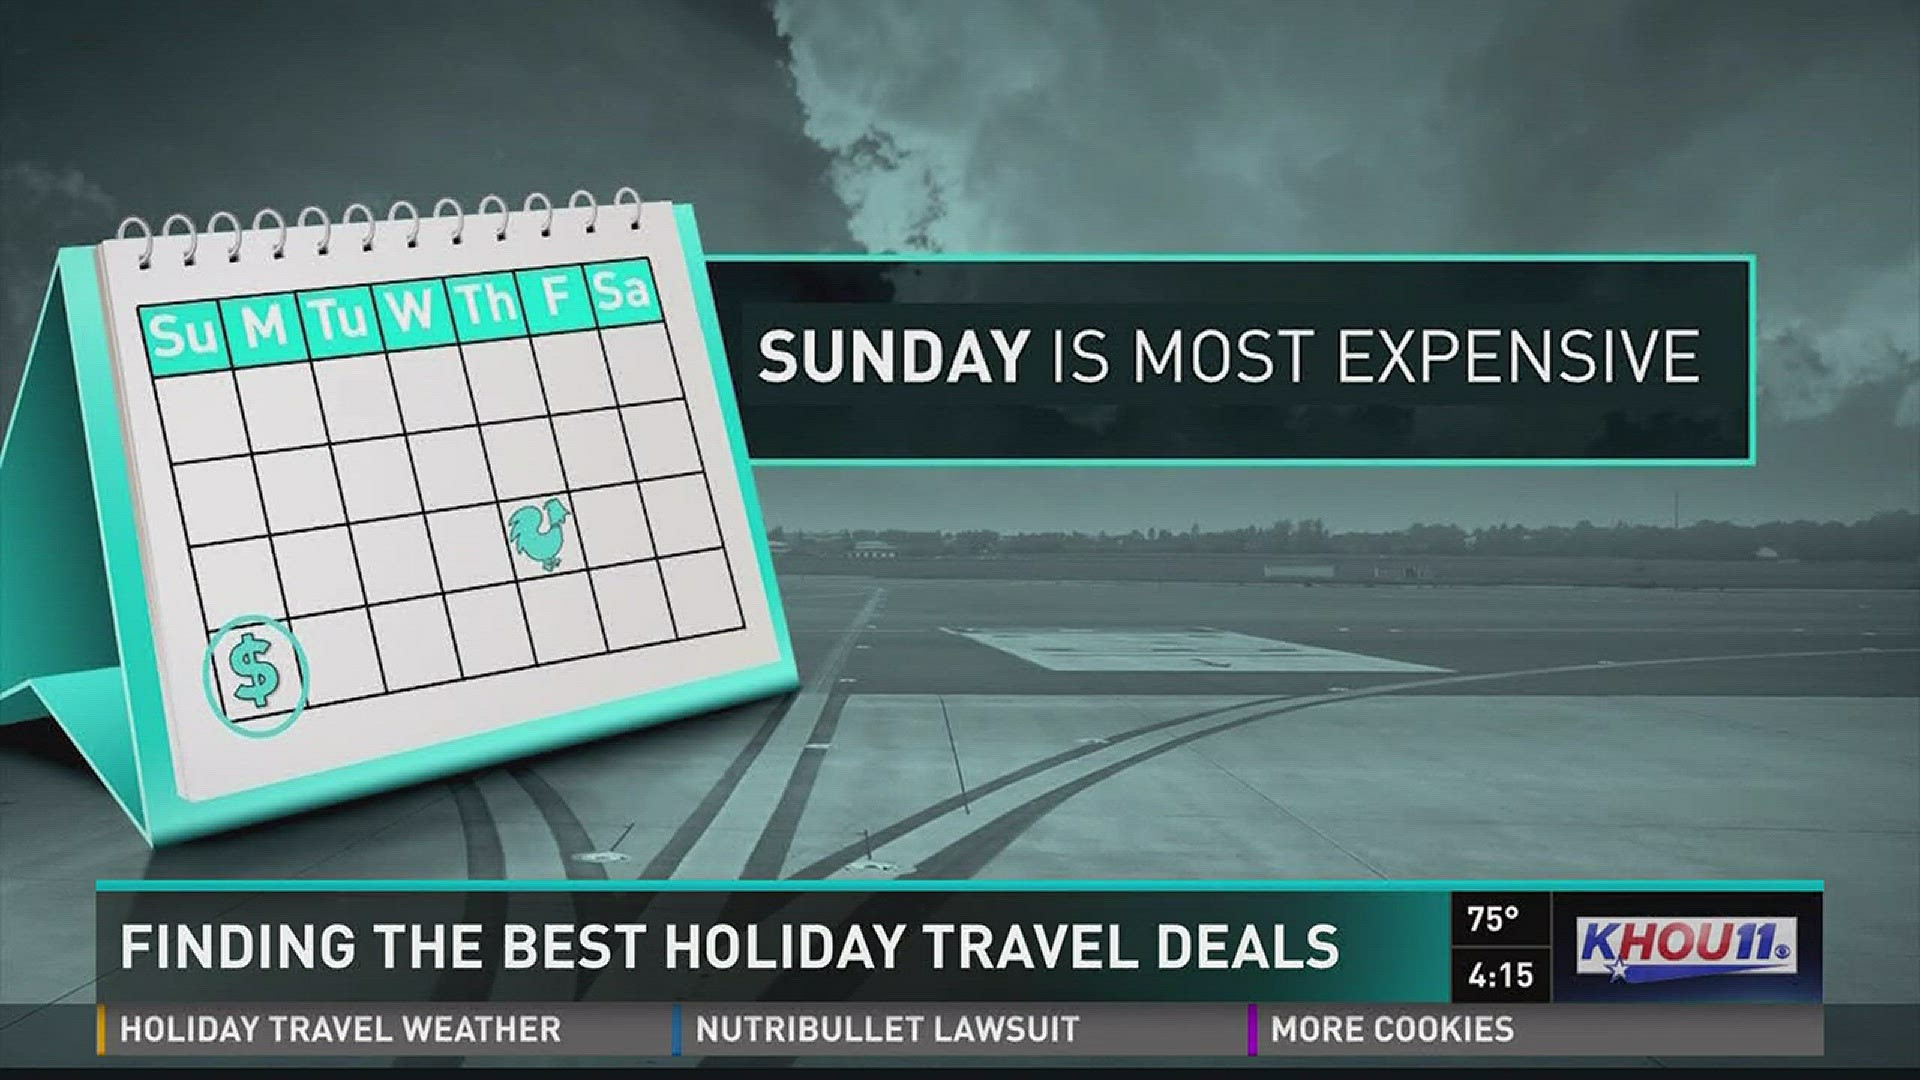 KHOU 11 reporter Matt Dougherty has the best holiday travel deals ahead of Thanksgiving week, one of the busiest weeks of the year.